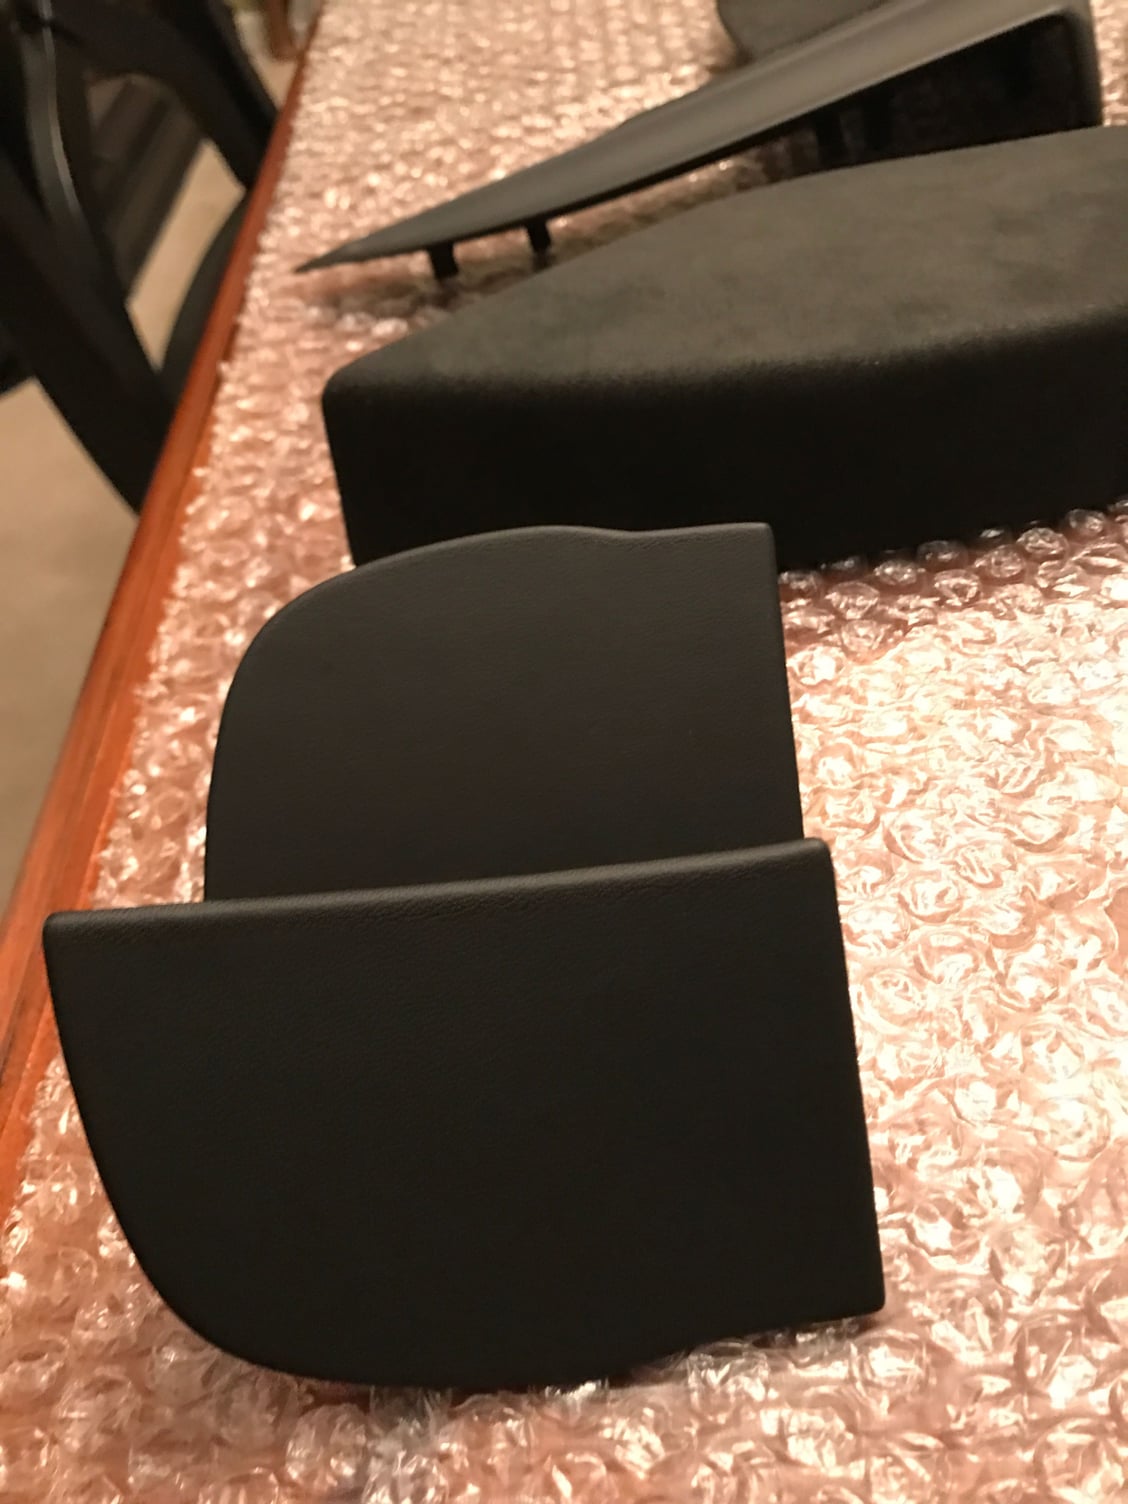 Interior/Upholstery - FS: Exclusive Option LEATHER parts (Steal these from me) - Used - 2013 to 2019 Porsche 911 - King Of Prussia, PA 19401, United States